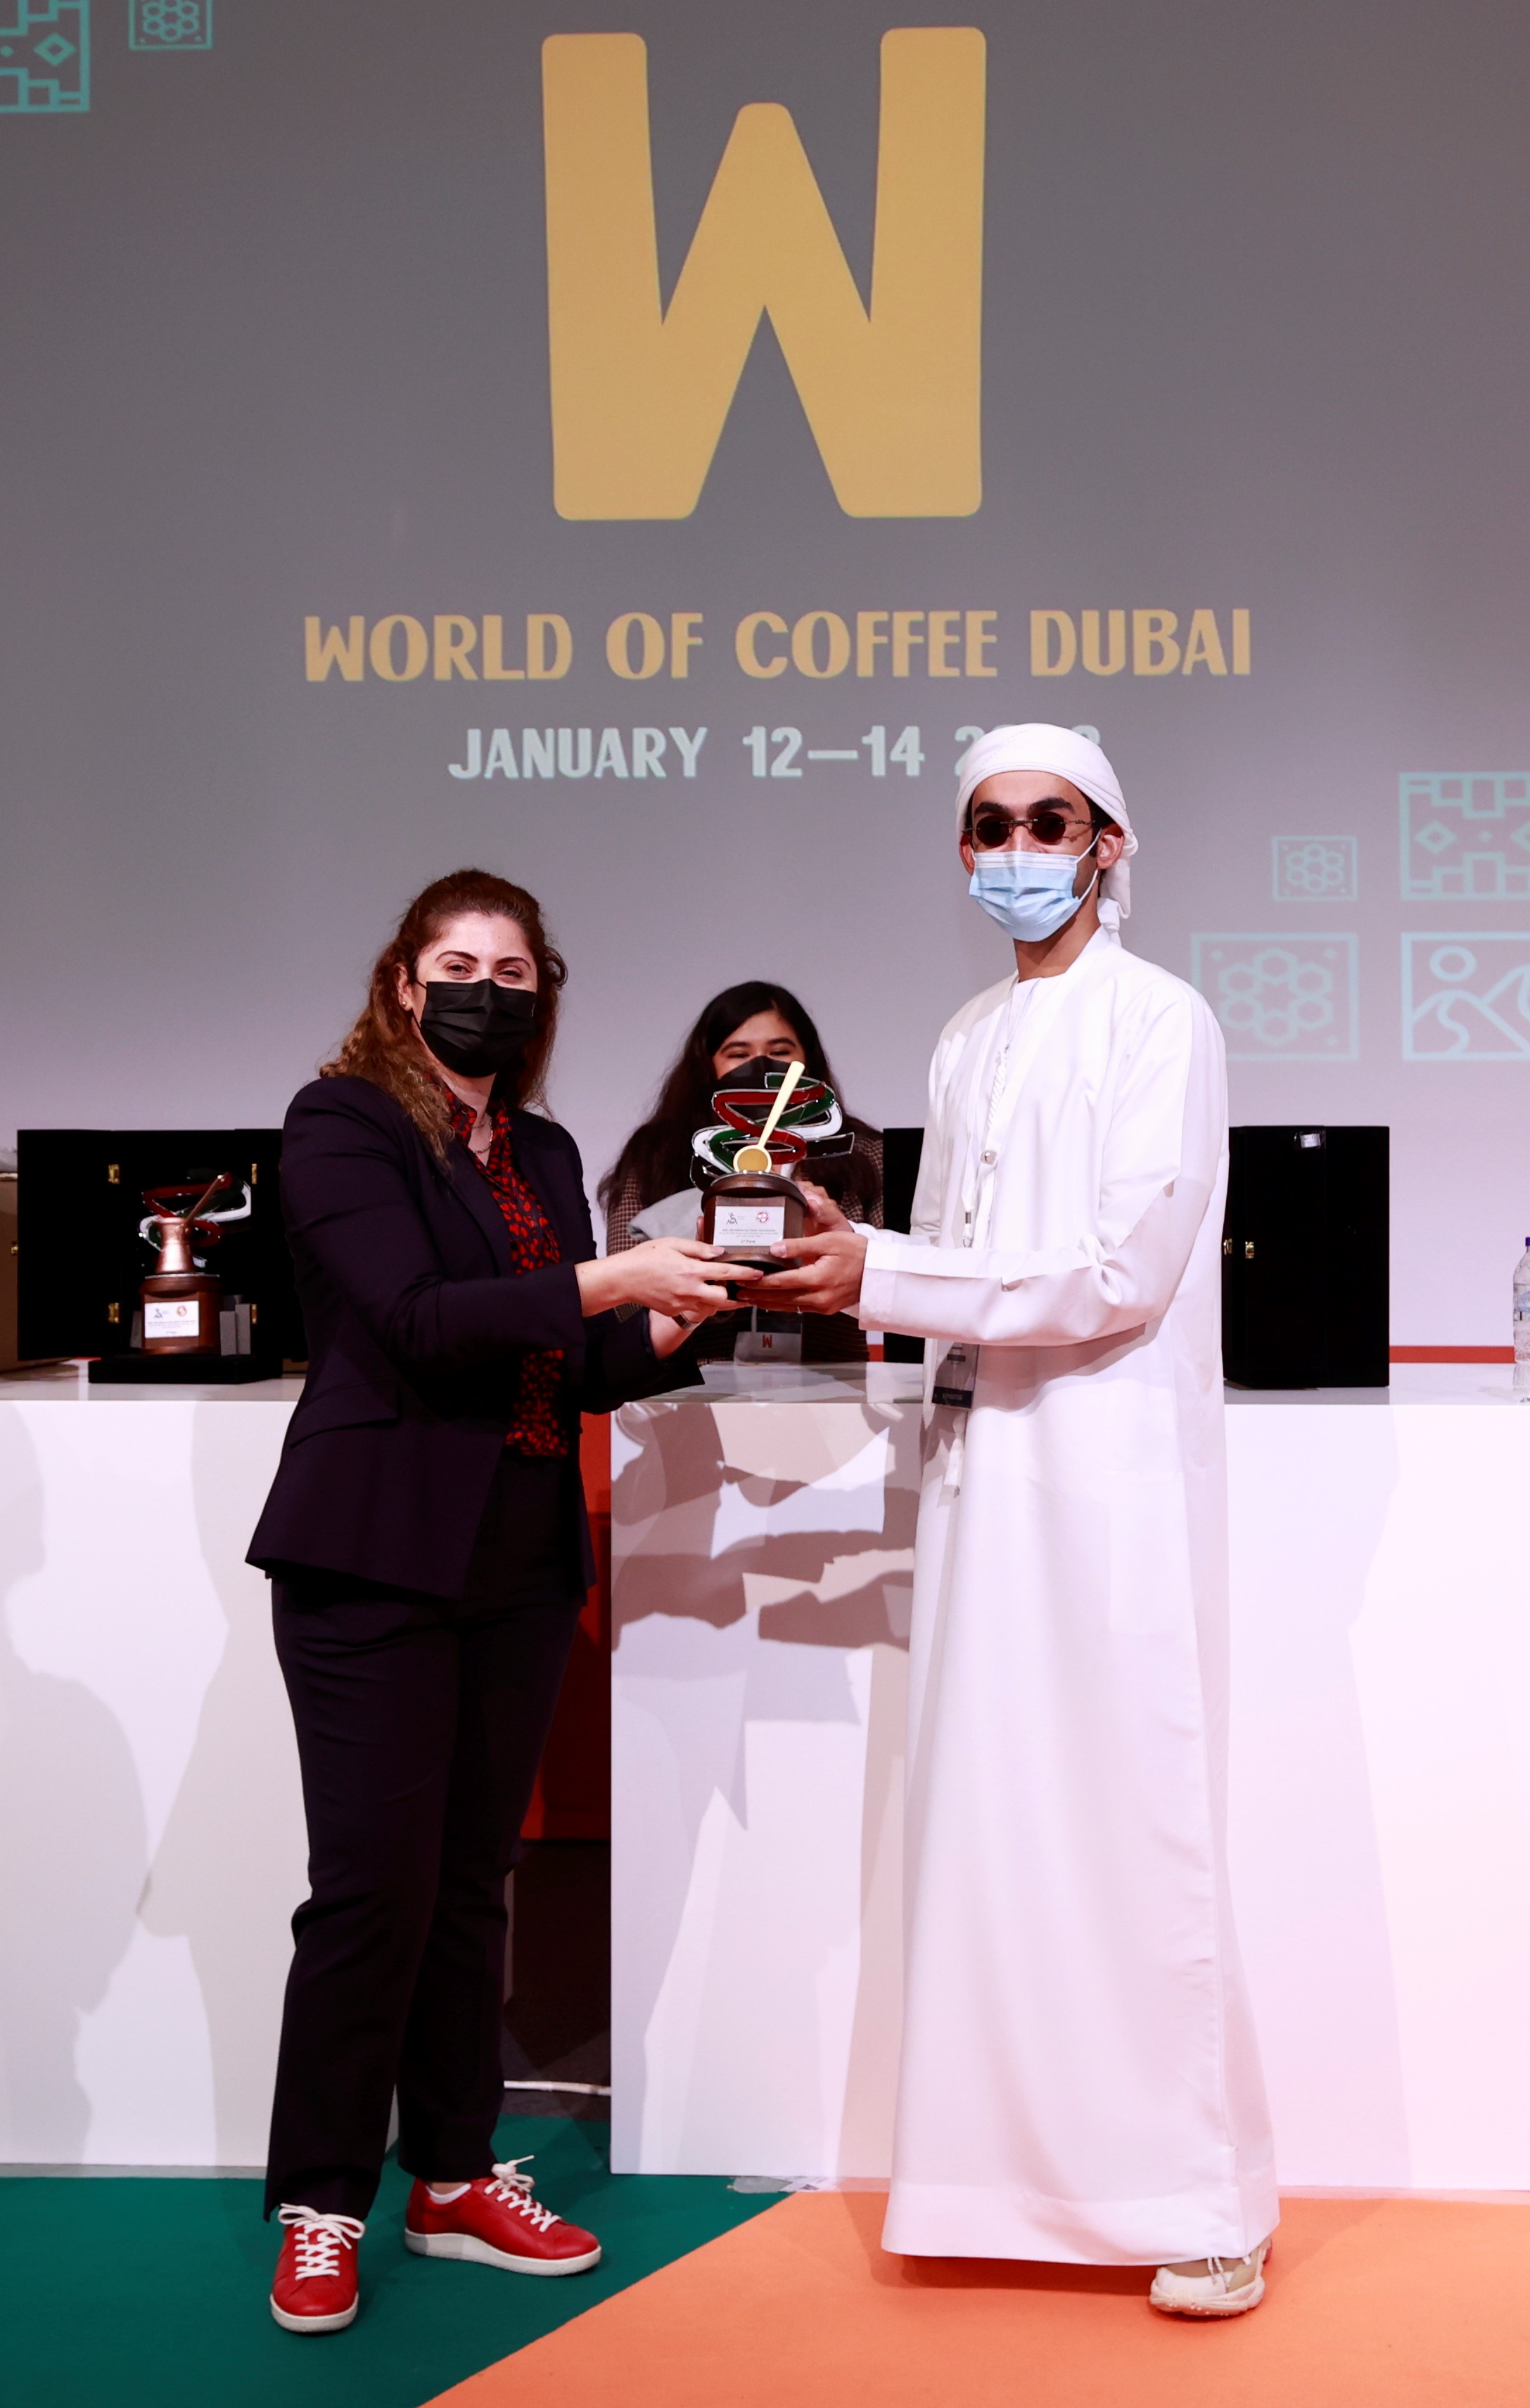 Winners Crowned for the UAE National Cezve/Ibrik and Cup Tasters Championships